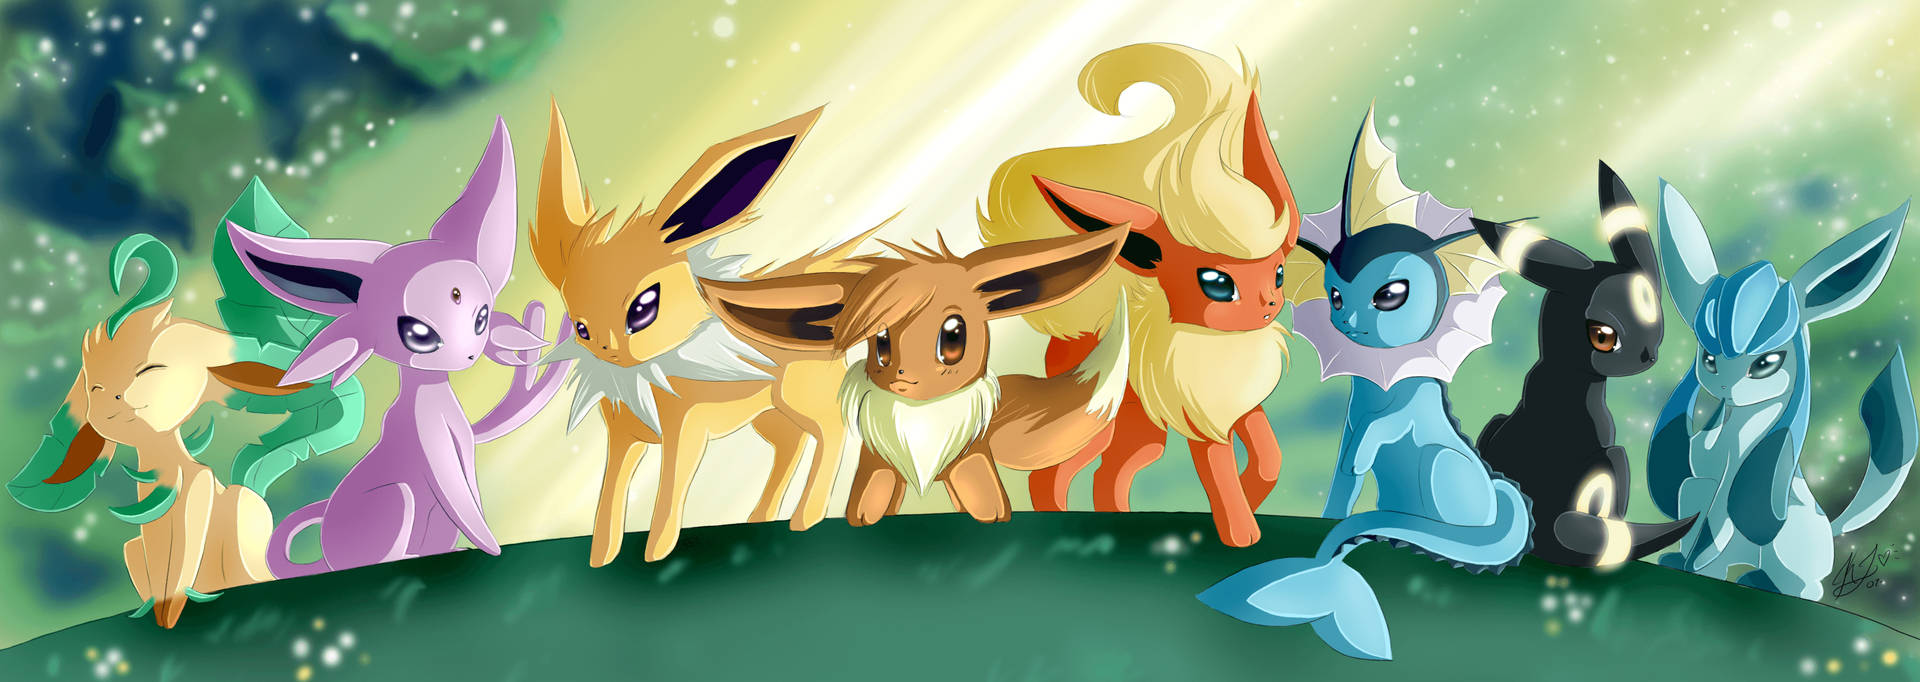 Espeon And Eevee Forms Background